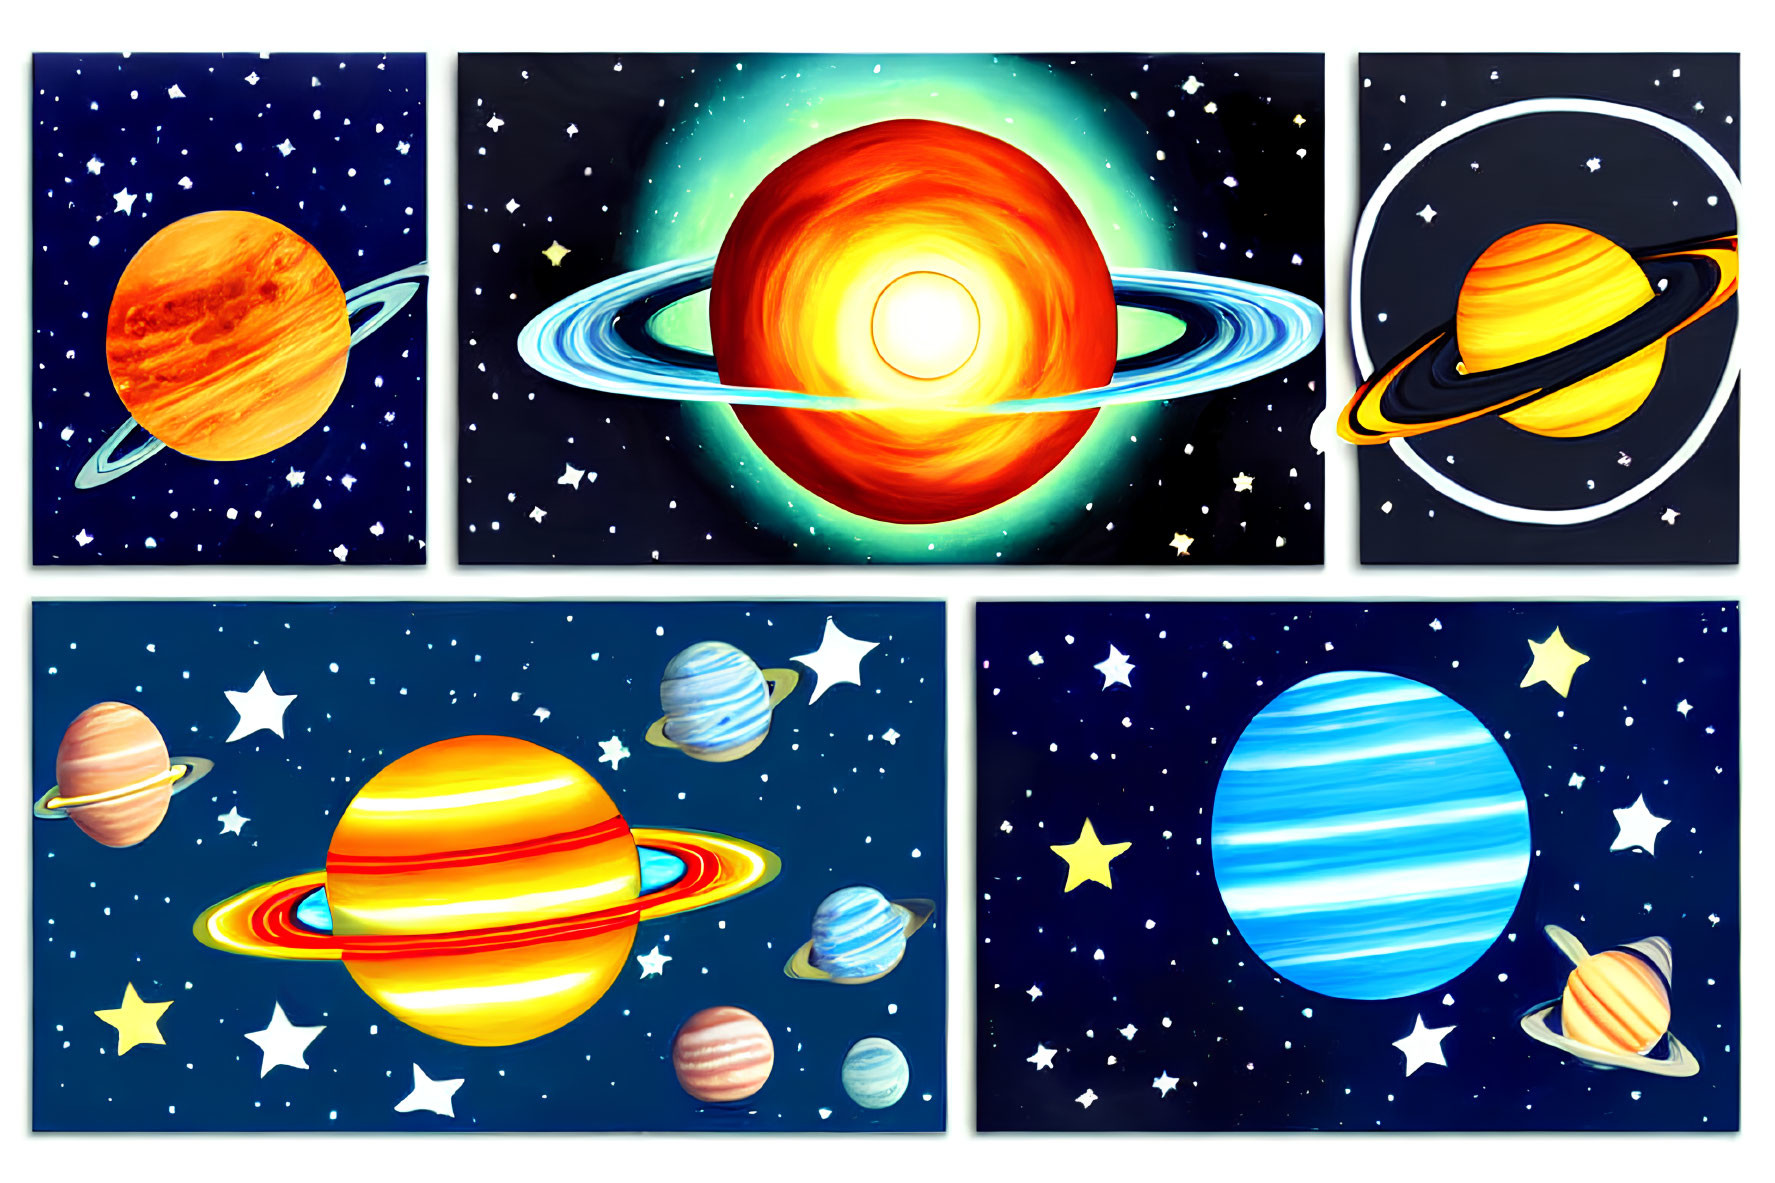 Colorful Planet Illustrations with Rings and Moons in Starry Space Grid